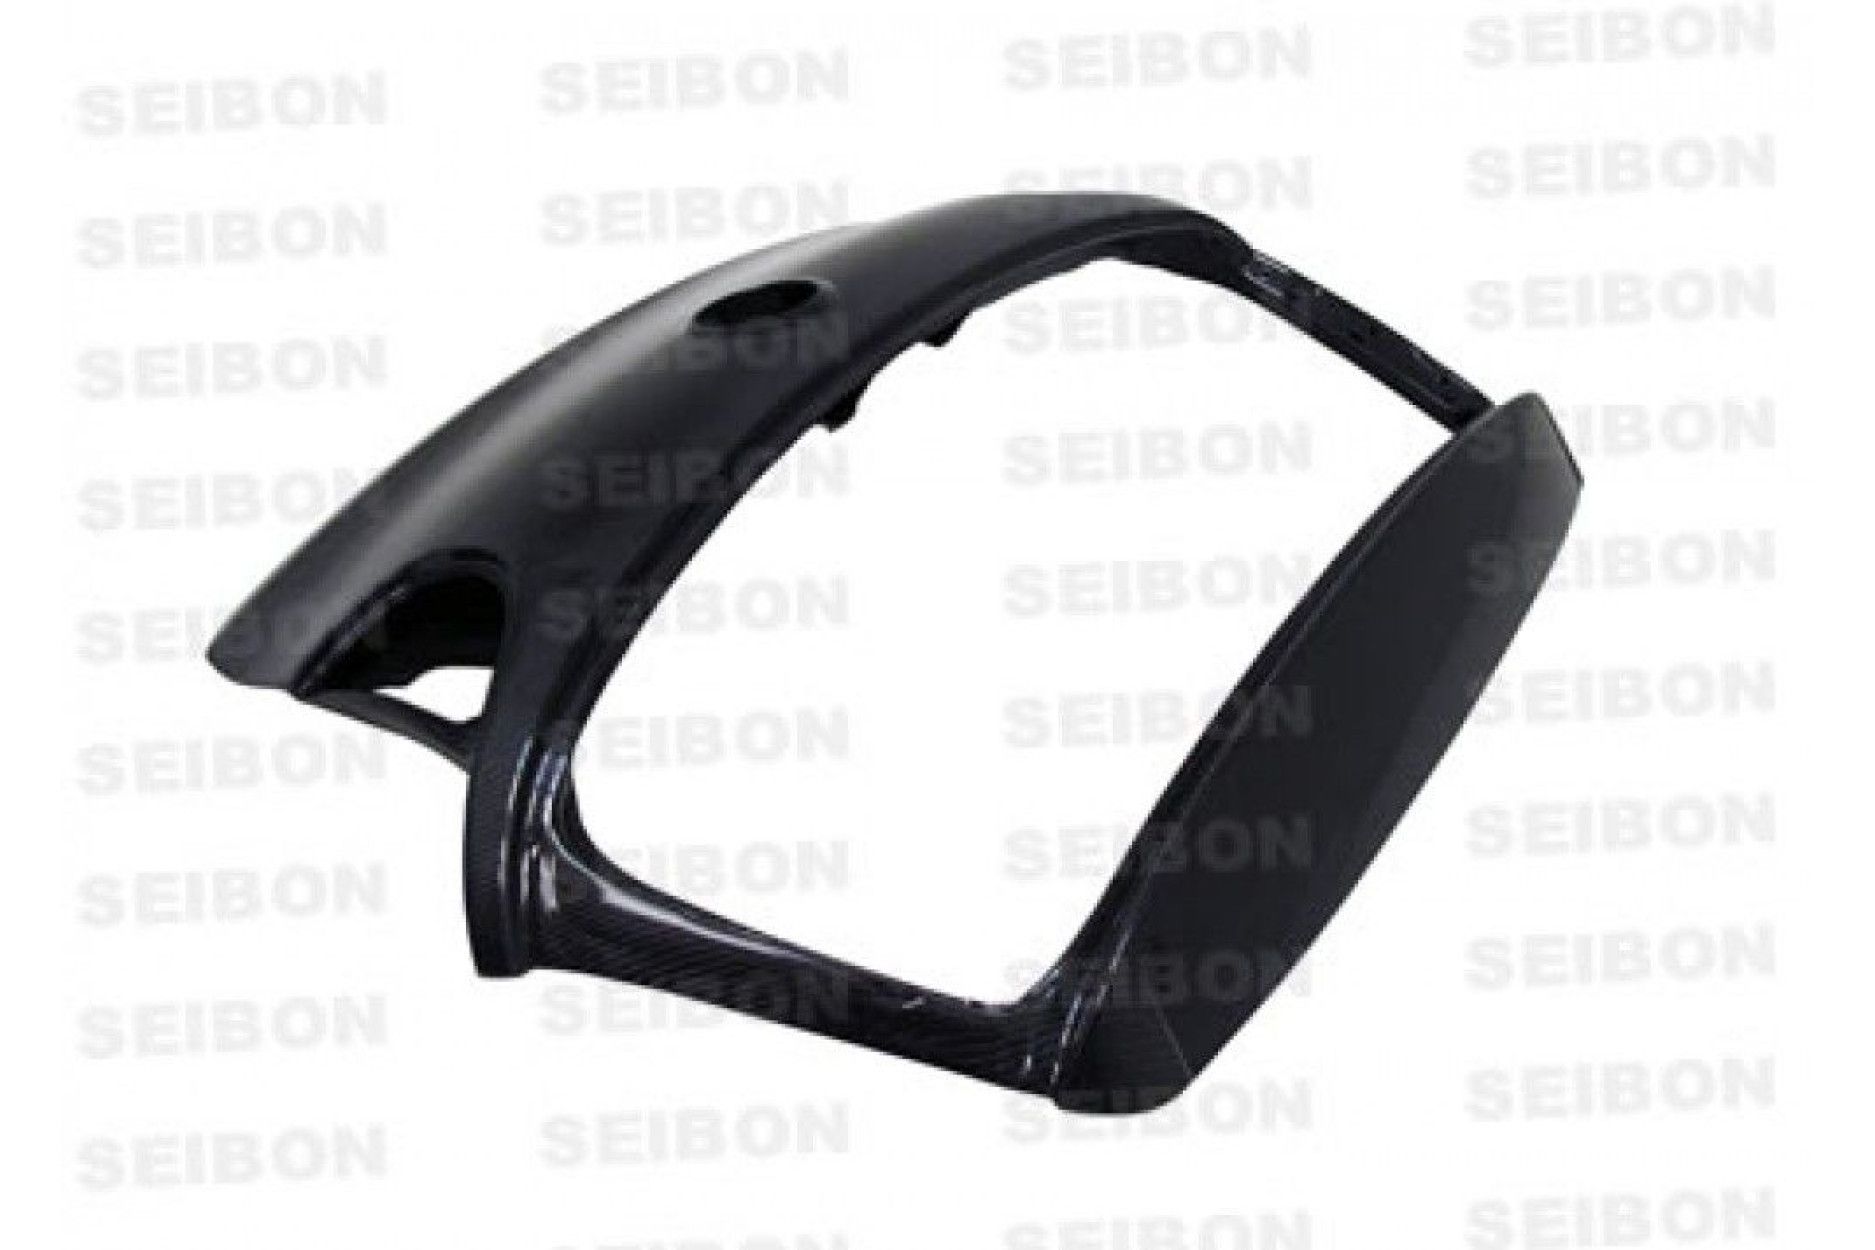 Seibon carbon trunk lid for VW Golf Golf 5 GTI 2006 - 2009 OE-Style (3) 